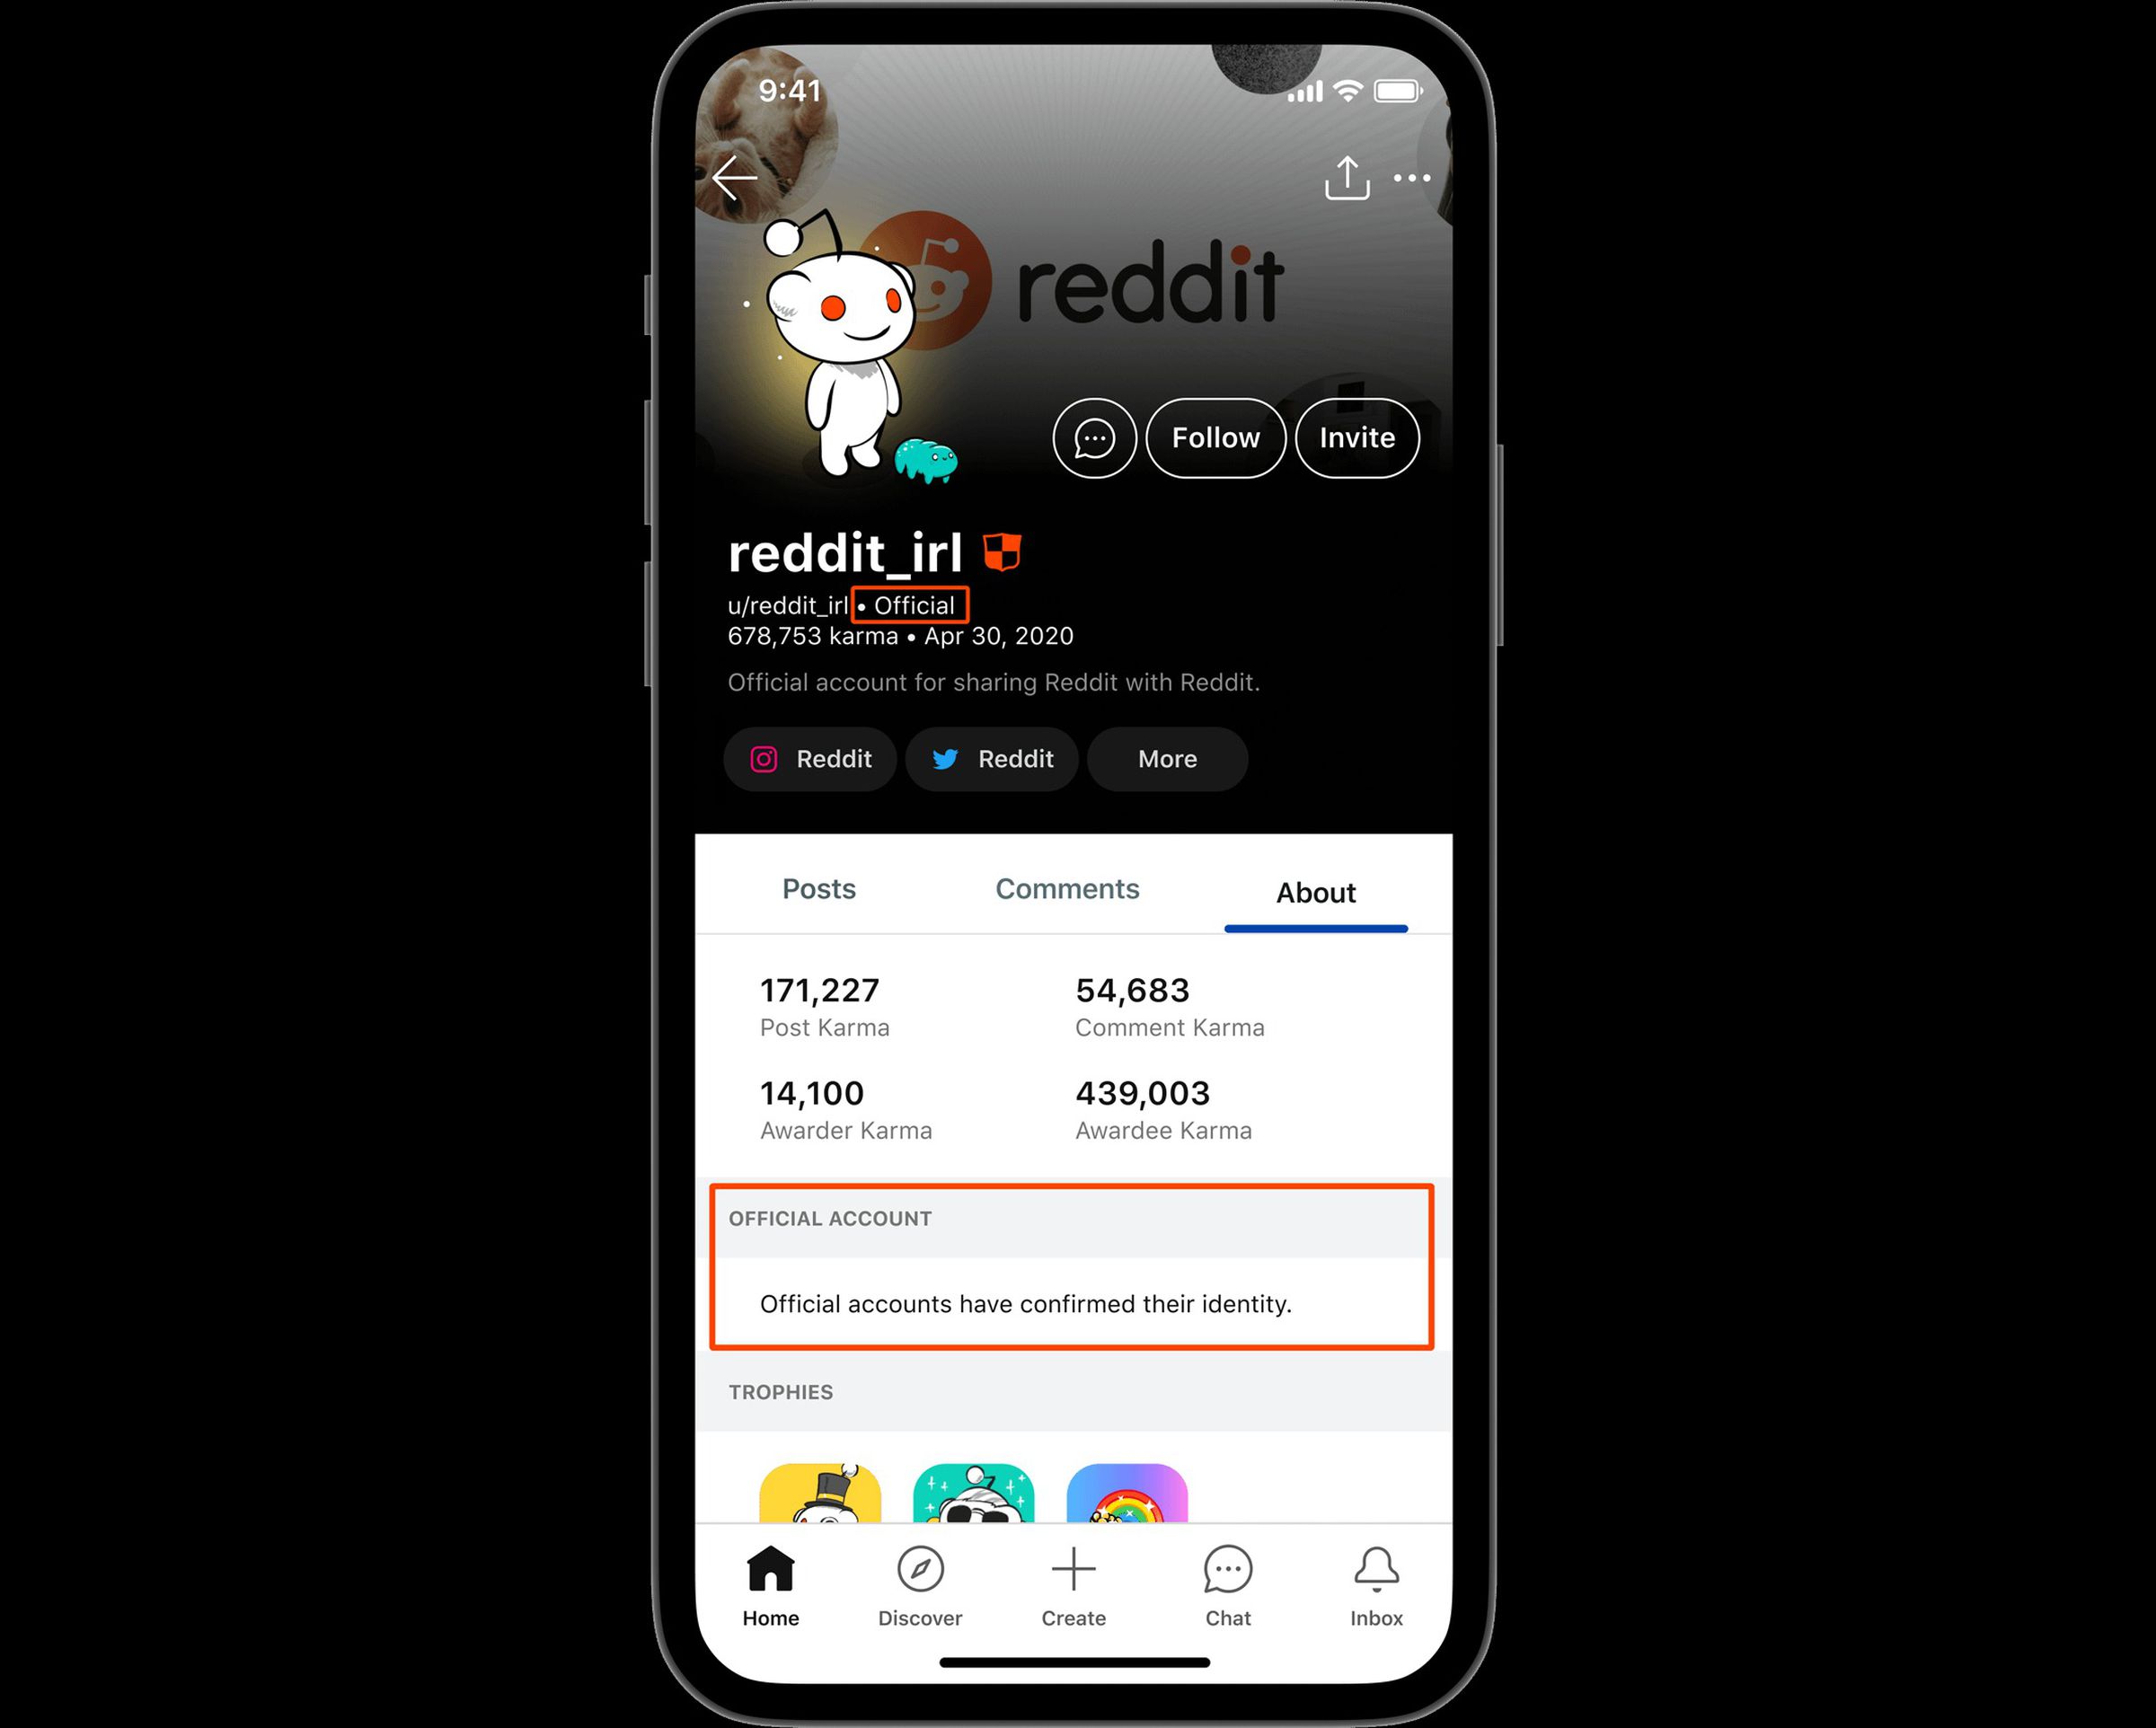 A screenshot of the reddit_irl account with two areas outlined in orange rectangles to draw attention to the new labels.